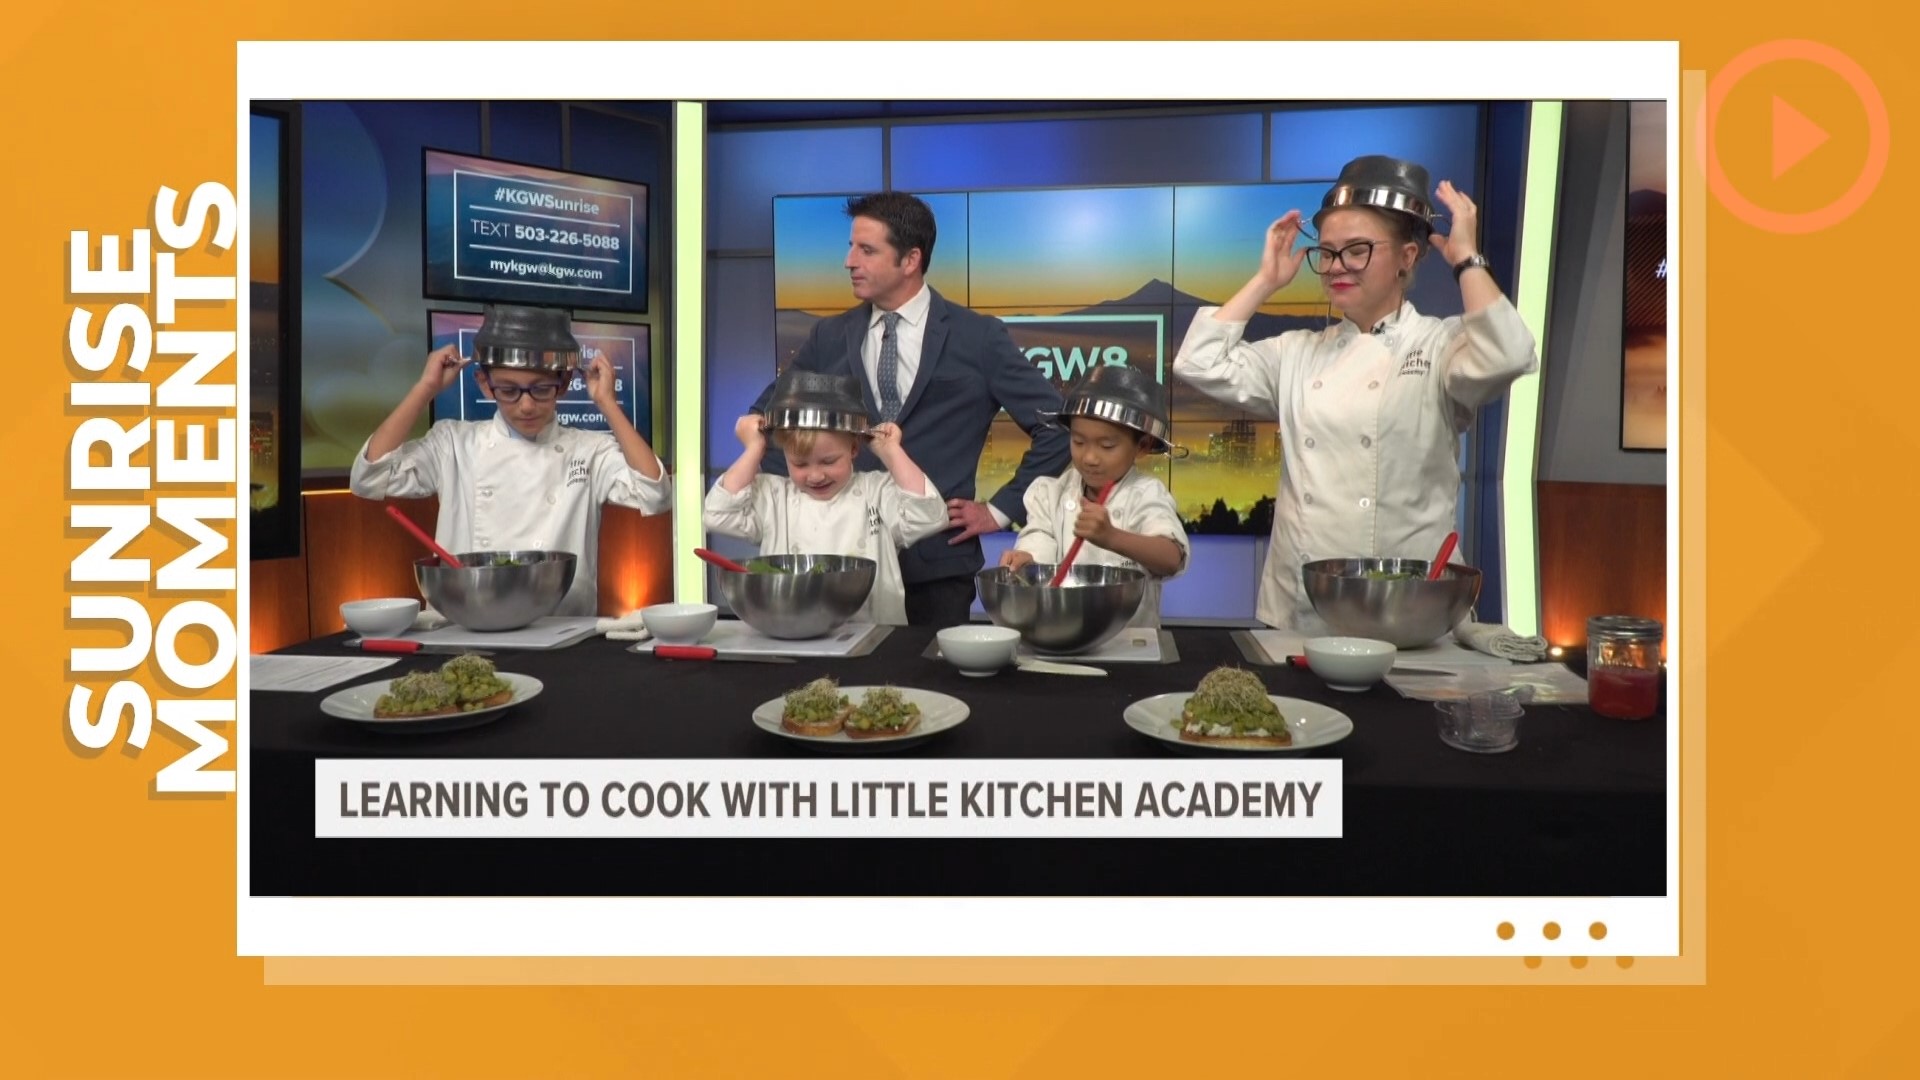 KGW Sunrise looks back at some fun moments of the week, including a visit from the chefs at Little Kitchen Academy and a preview of the Portland Juggling Festival.